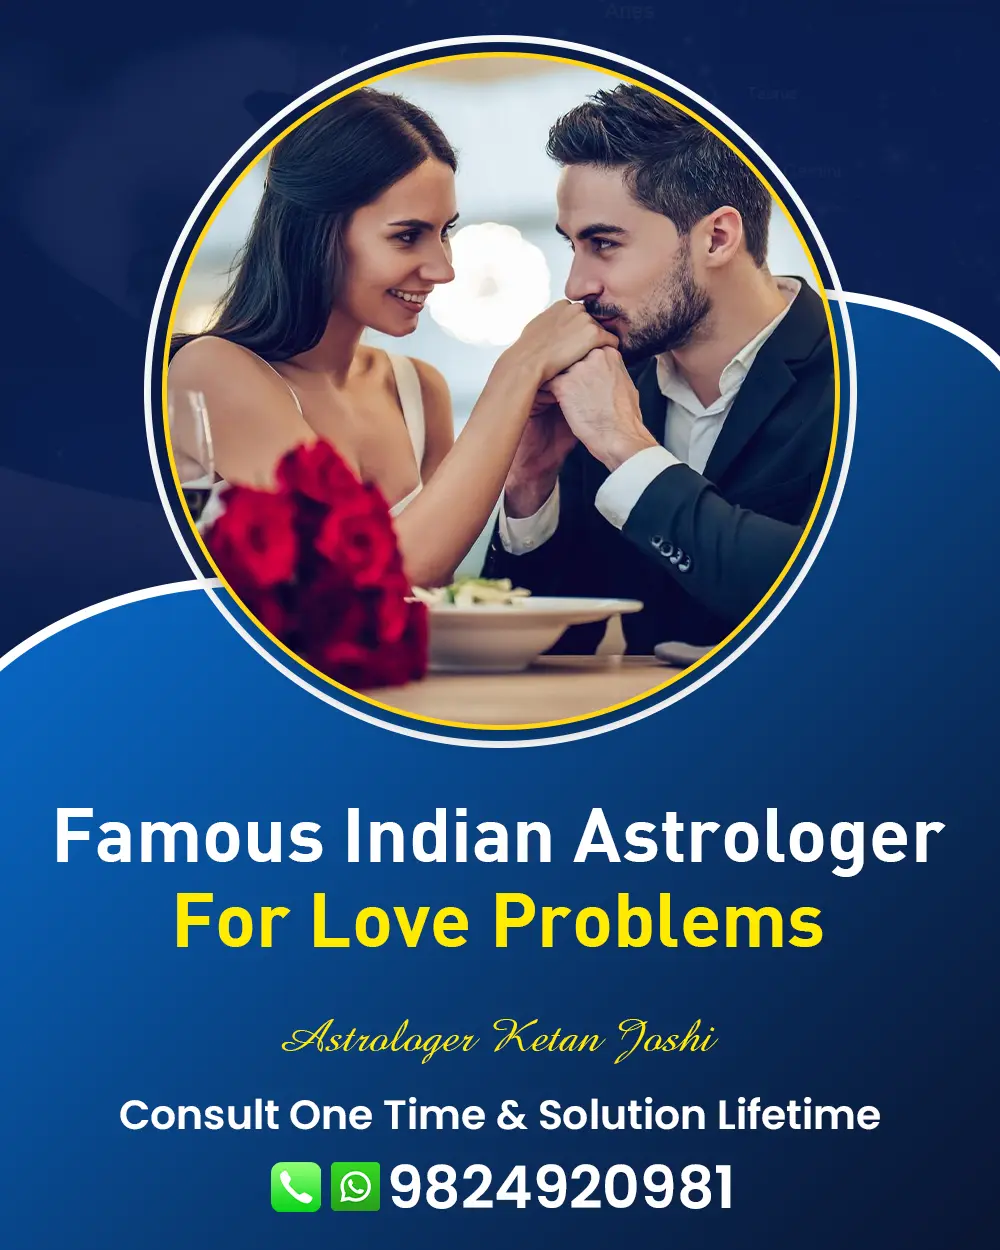 Love Problem Astrologer In Bharuch